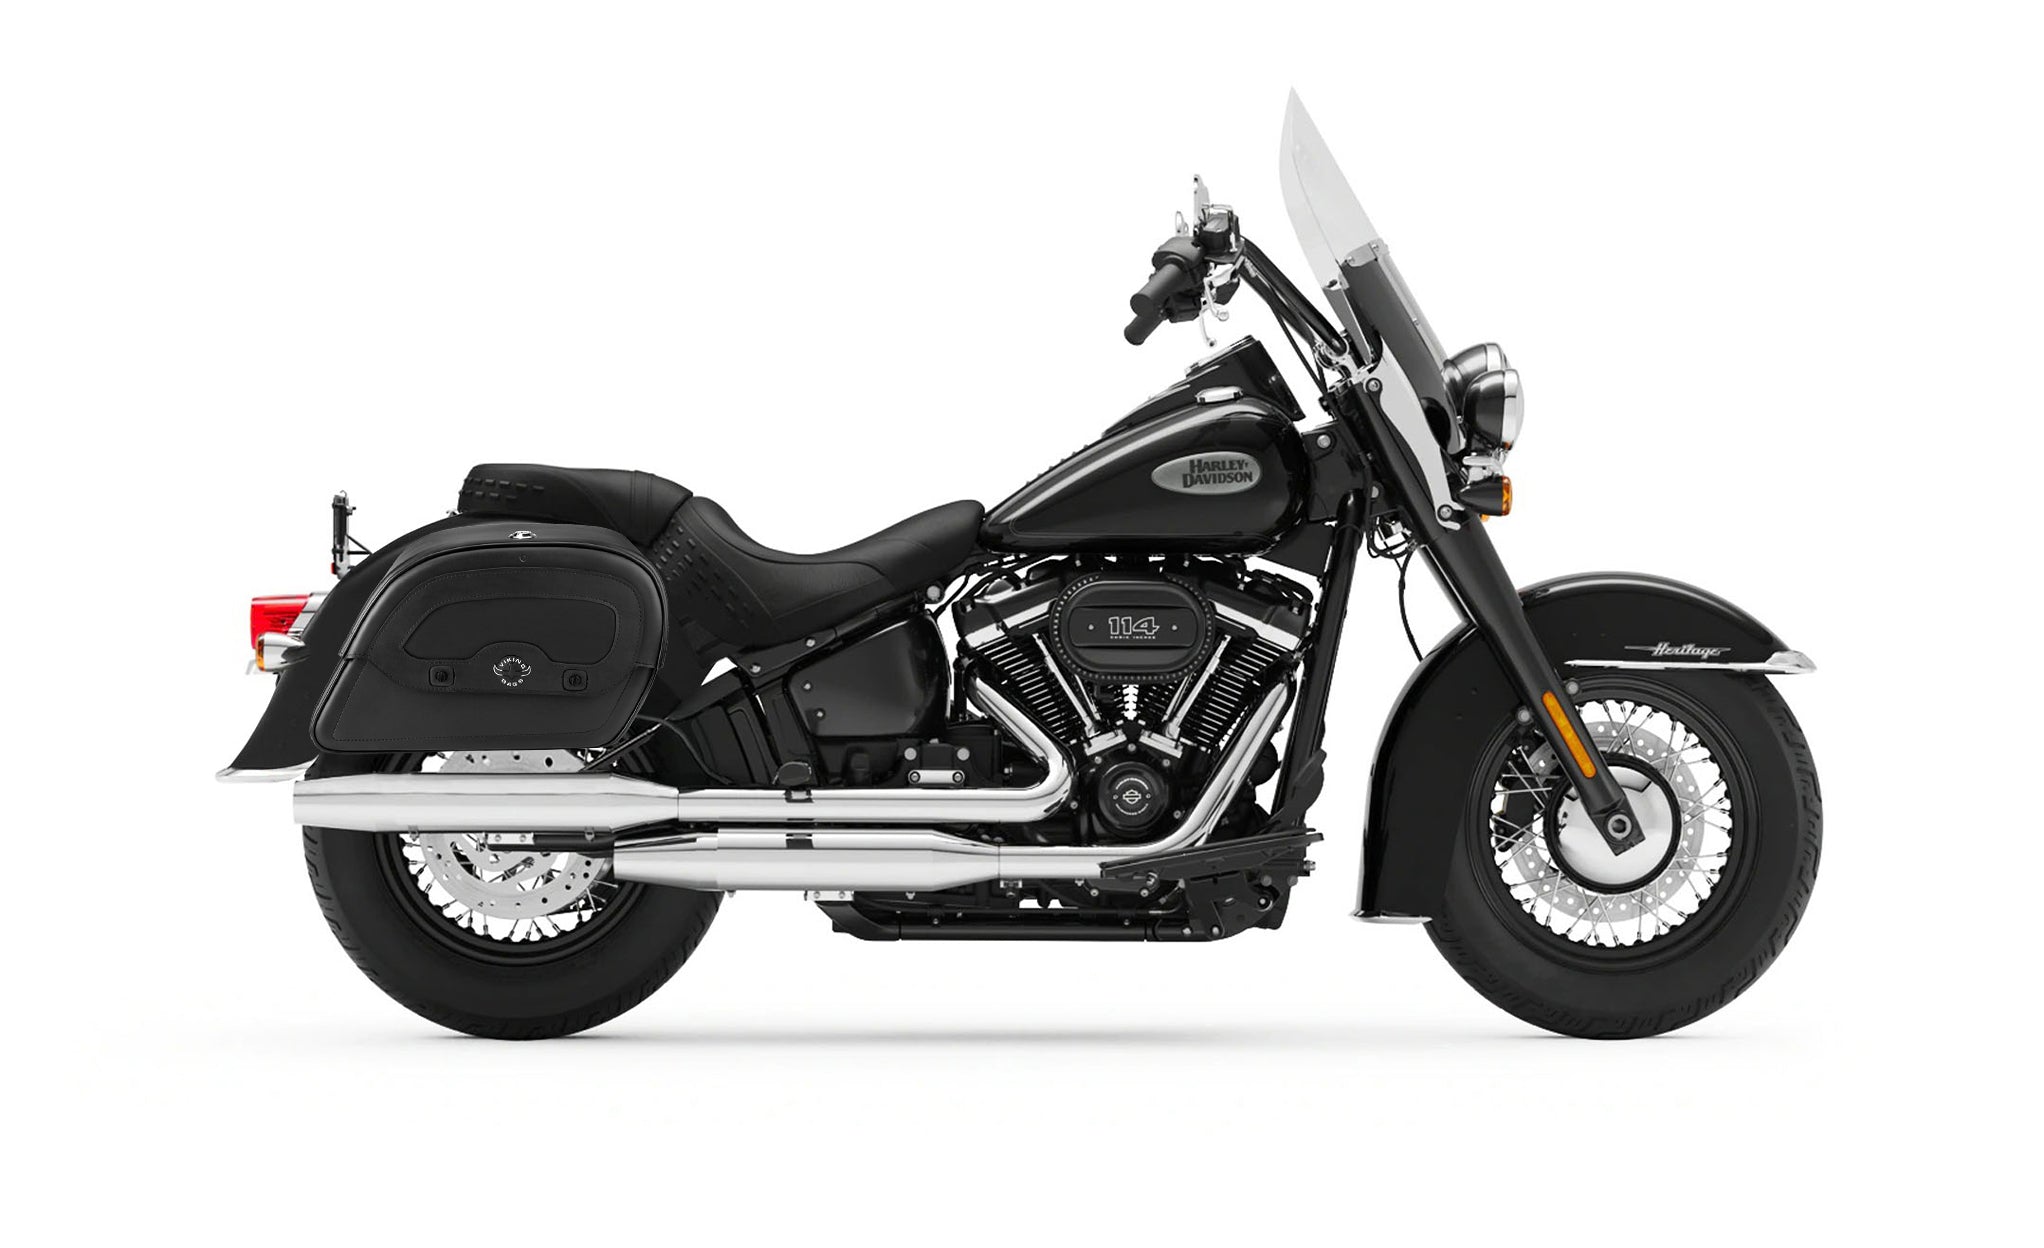 28L - Warrior Medium Quick-Mount Motorcycle Saddlebags For Harley Softail Heritage FLHC/S @expand